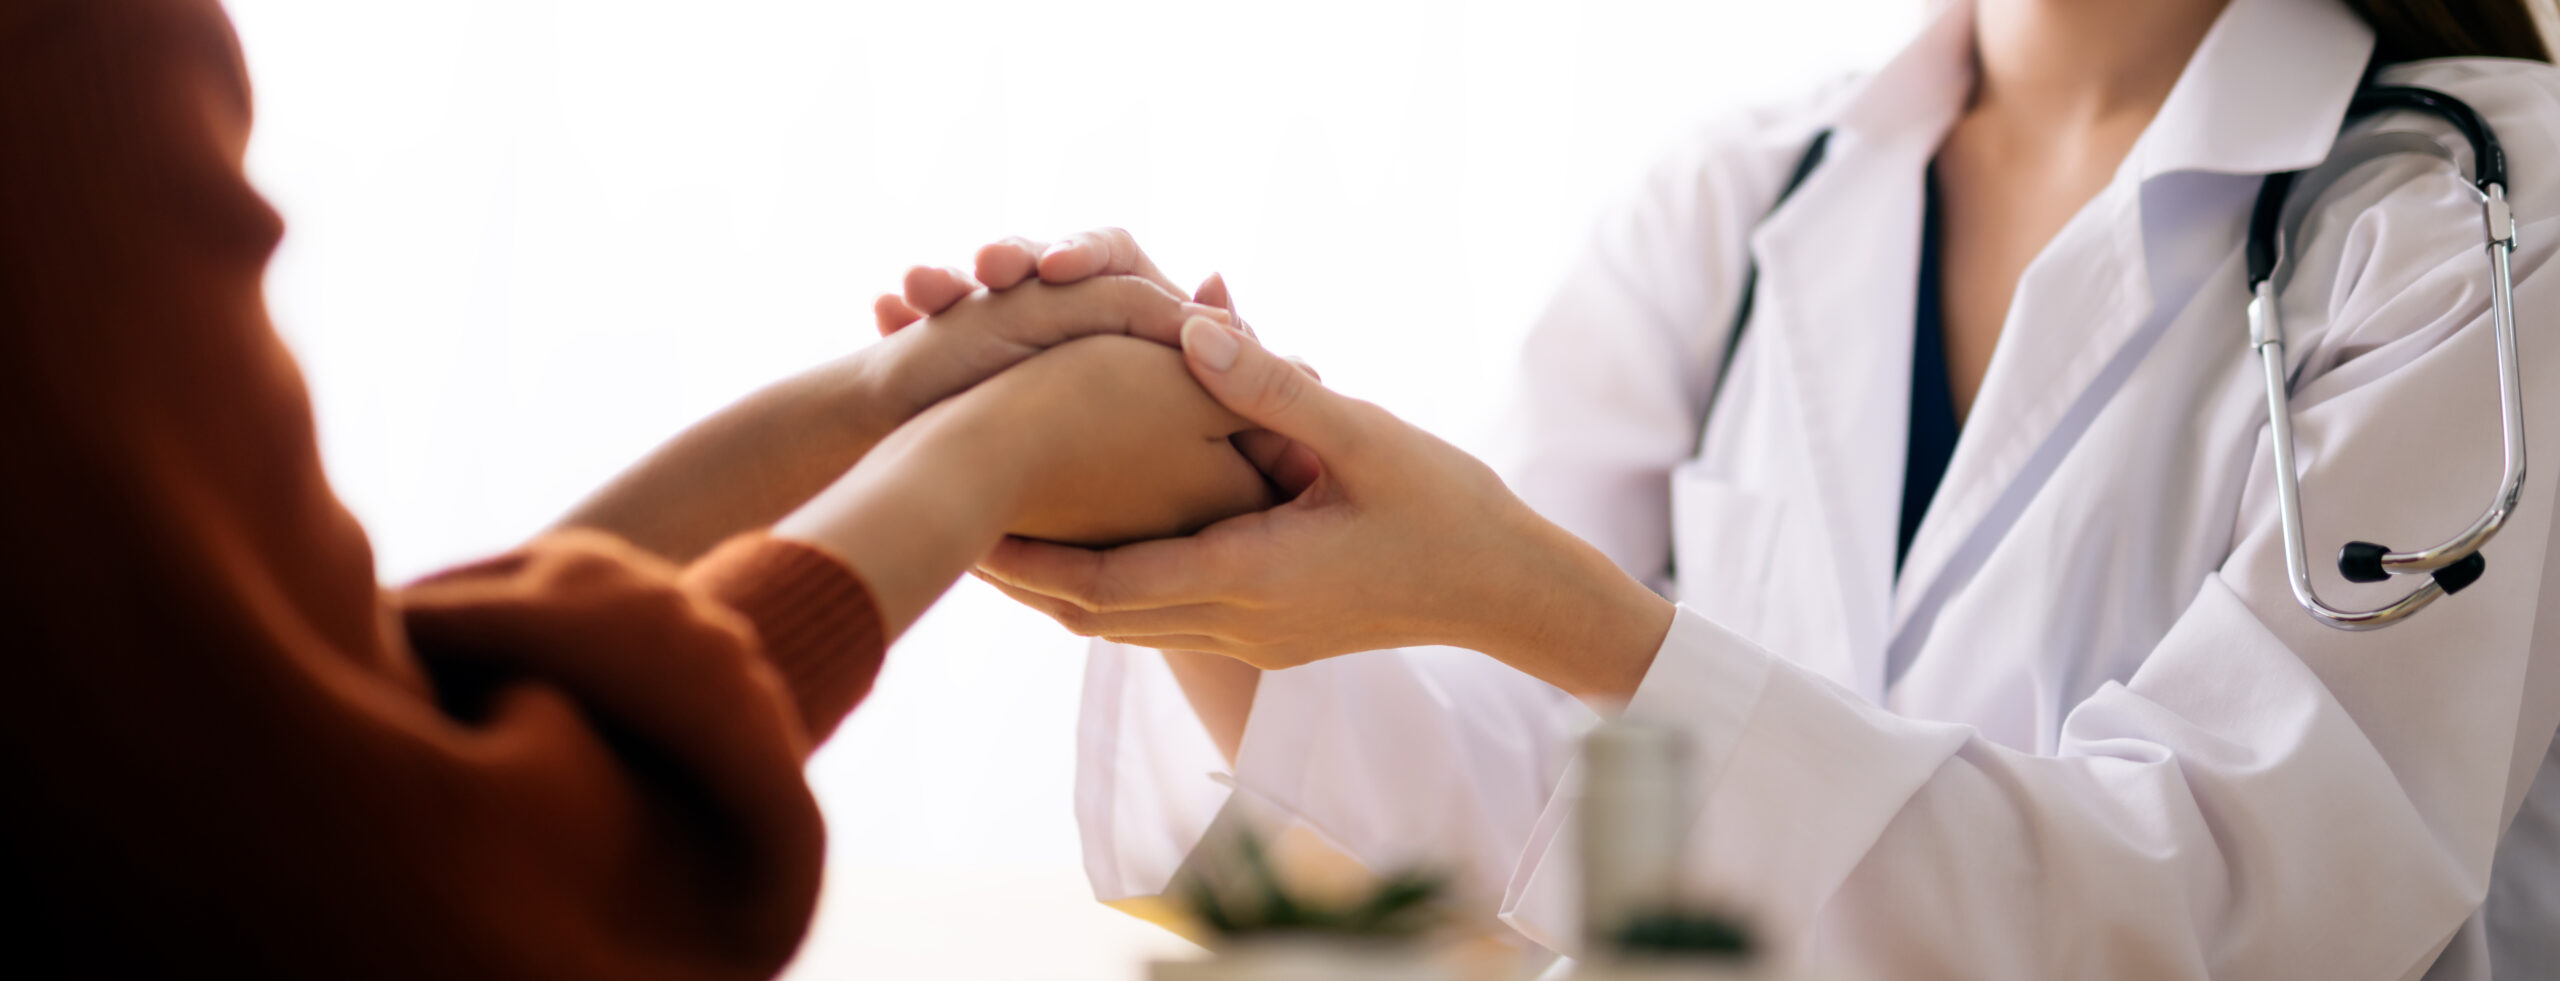 Doctor holding patients hand in an encouraging manner